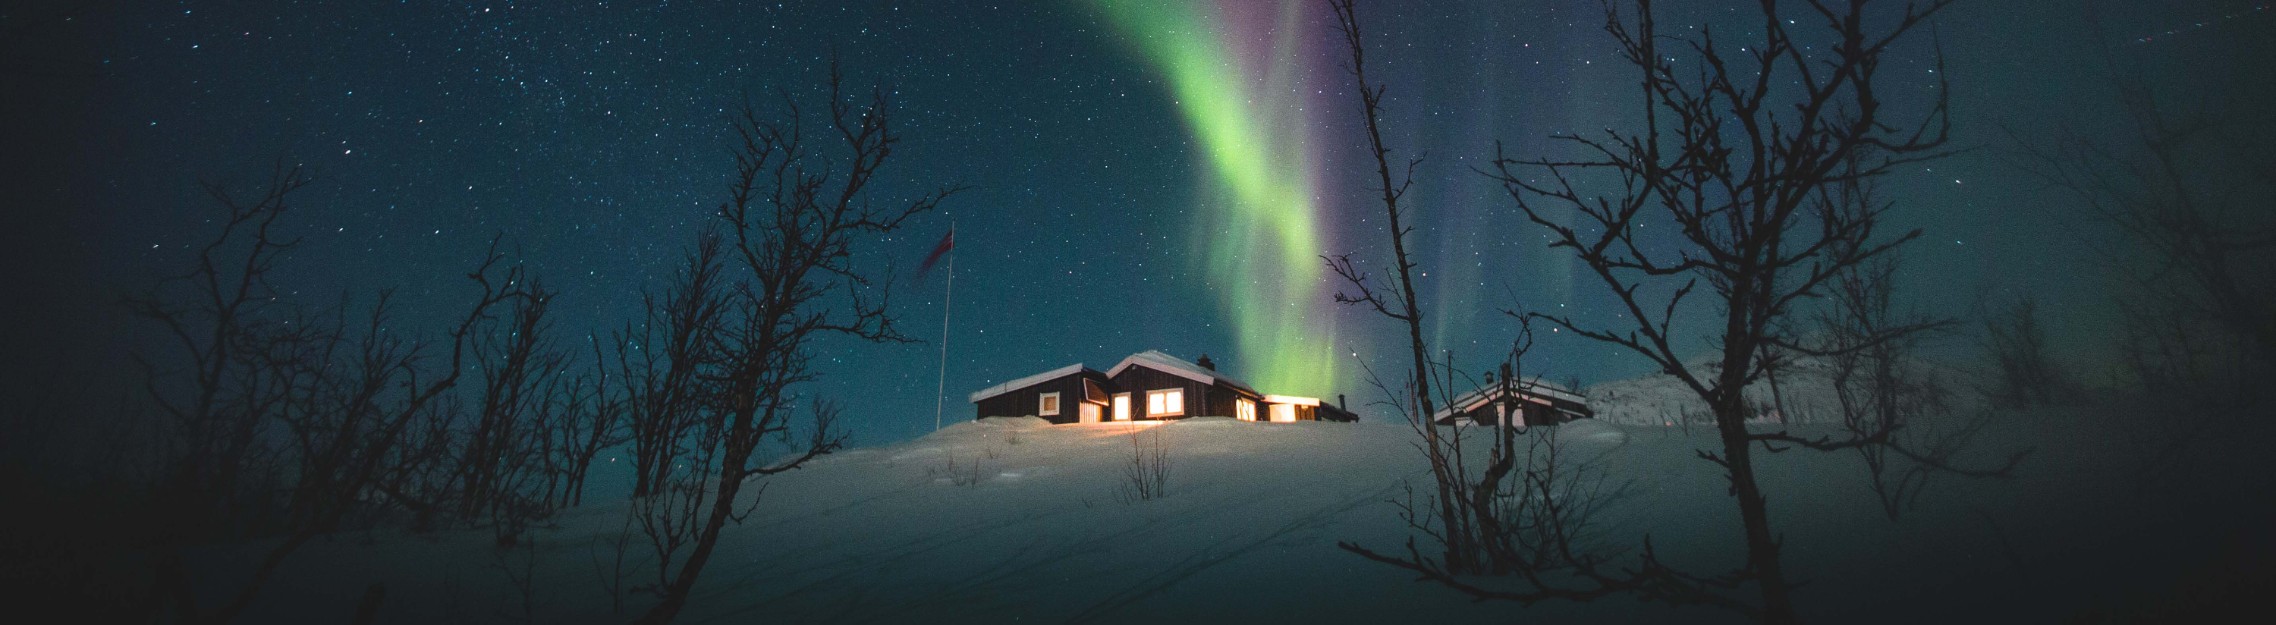 Beautiful Northern lights in the night sky above a lone cabin in Riksgransen, Sweden.